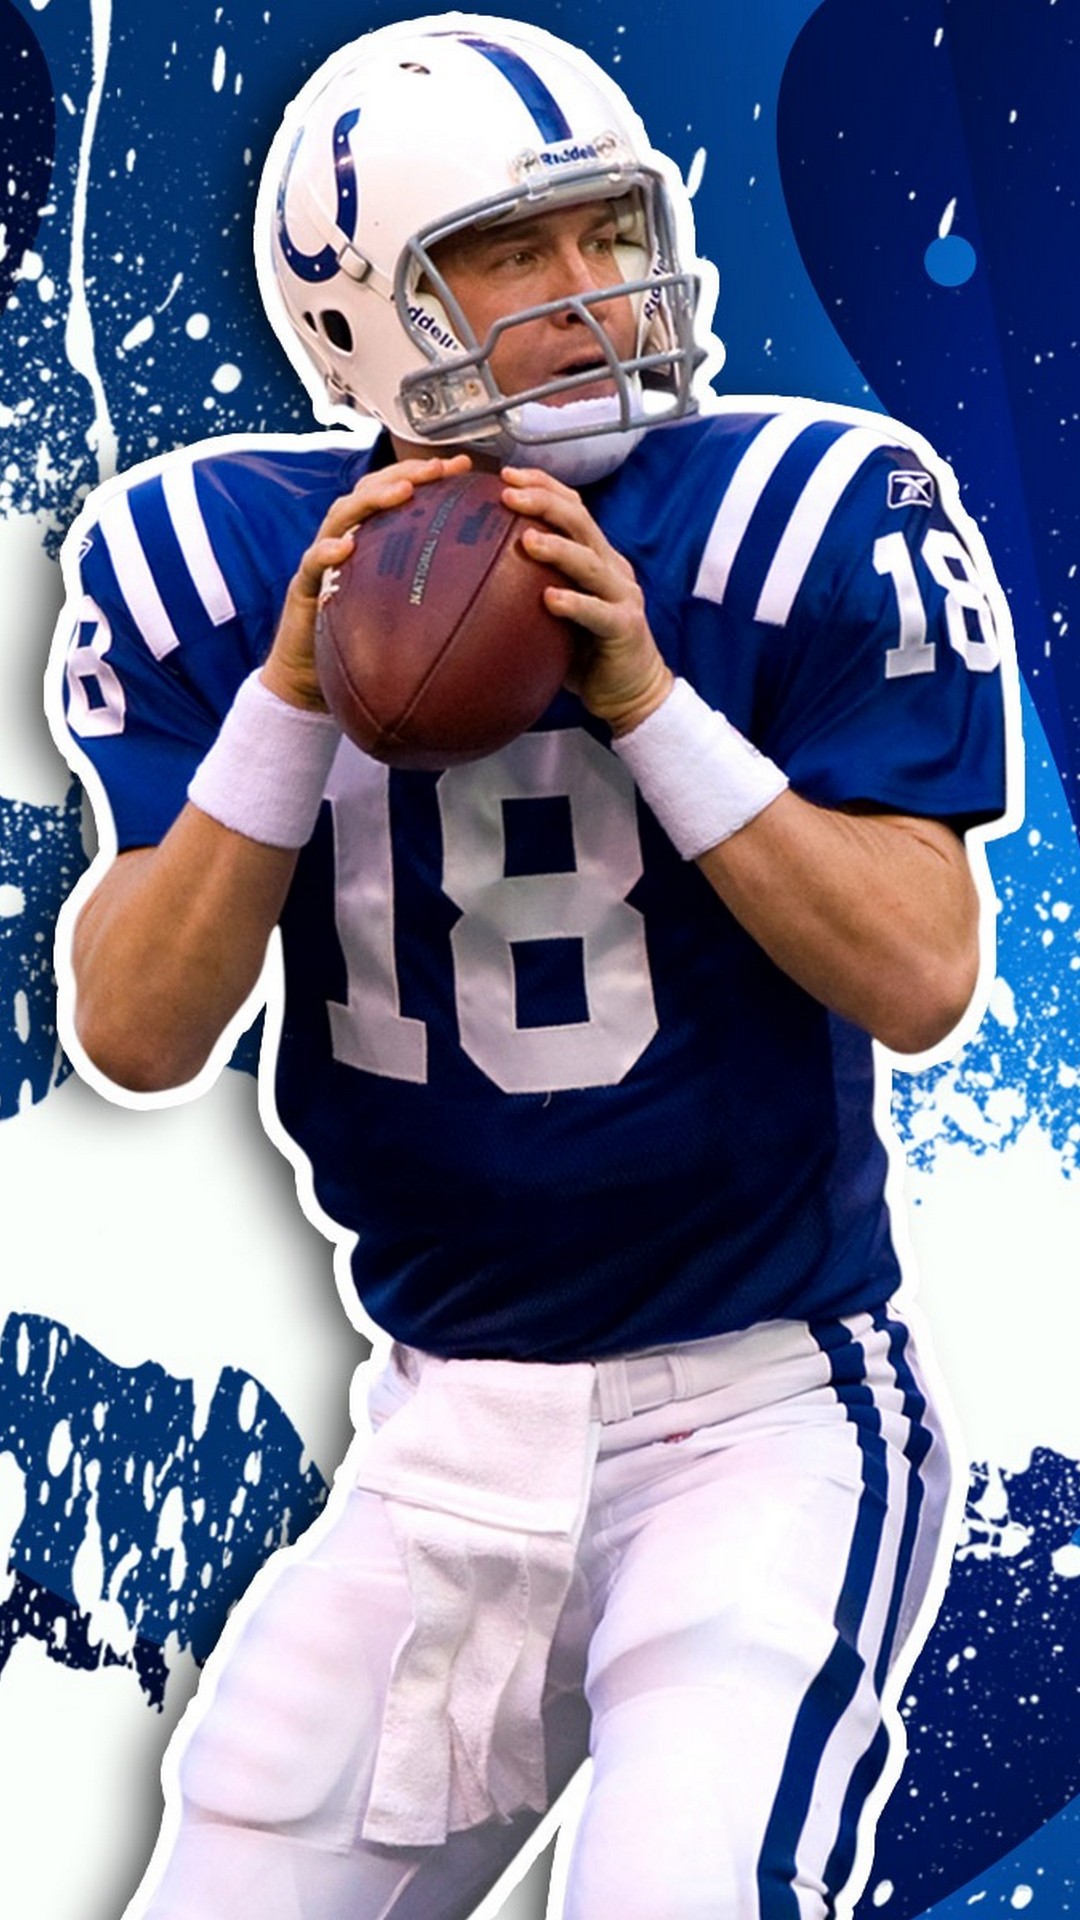 iPhone Wallpaper HD Peyton Manning Indianapolis Colts with high-resolution 1080x1920 pixel. You can use this wallpaper for your Mac or Windows Desktop Background, iPhone, Android or Tablet and another Smartphone device